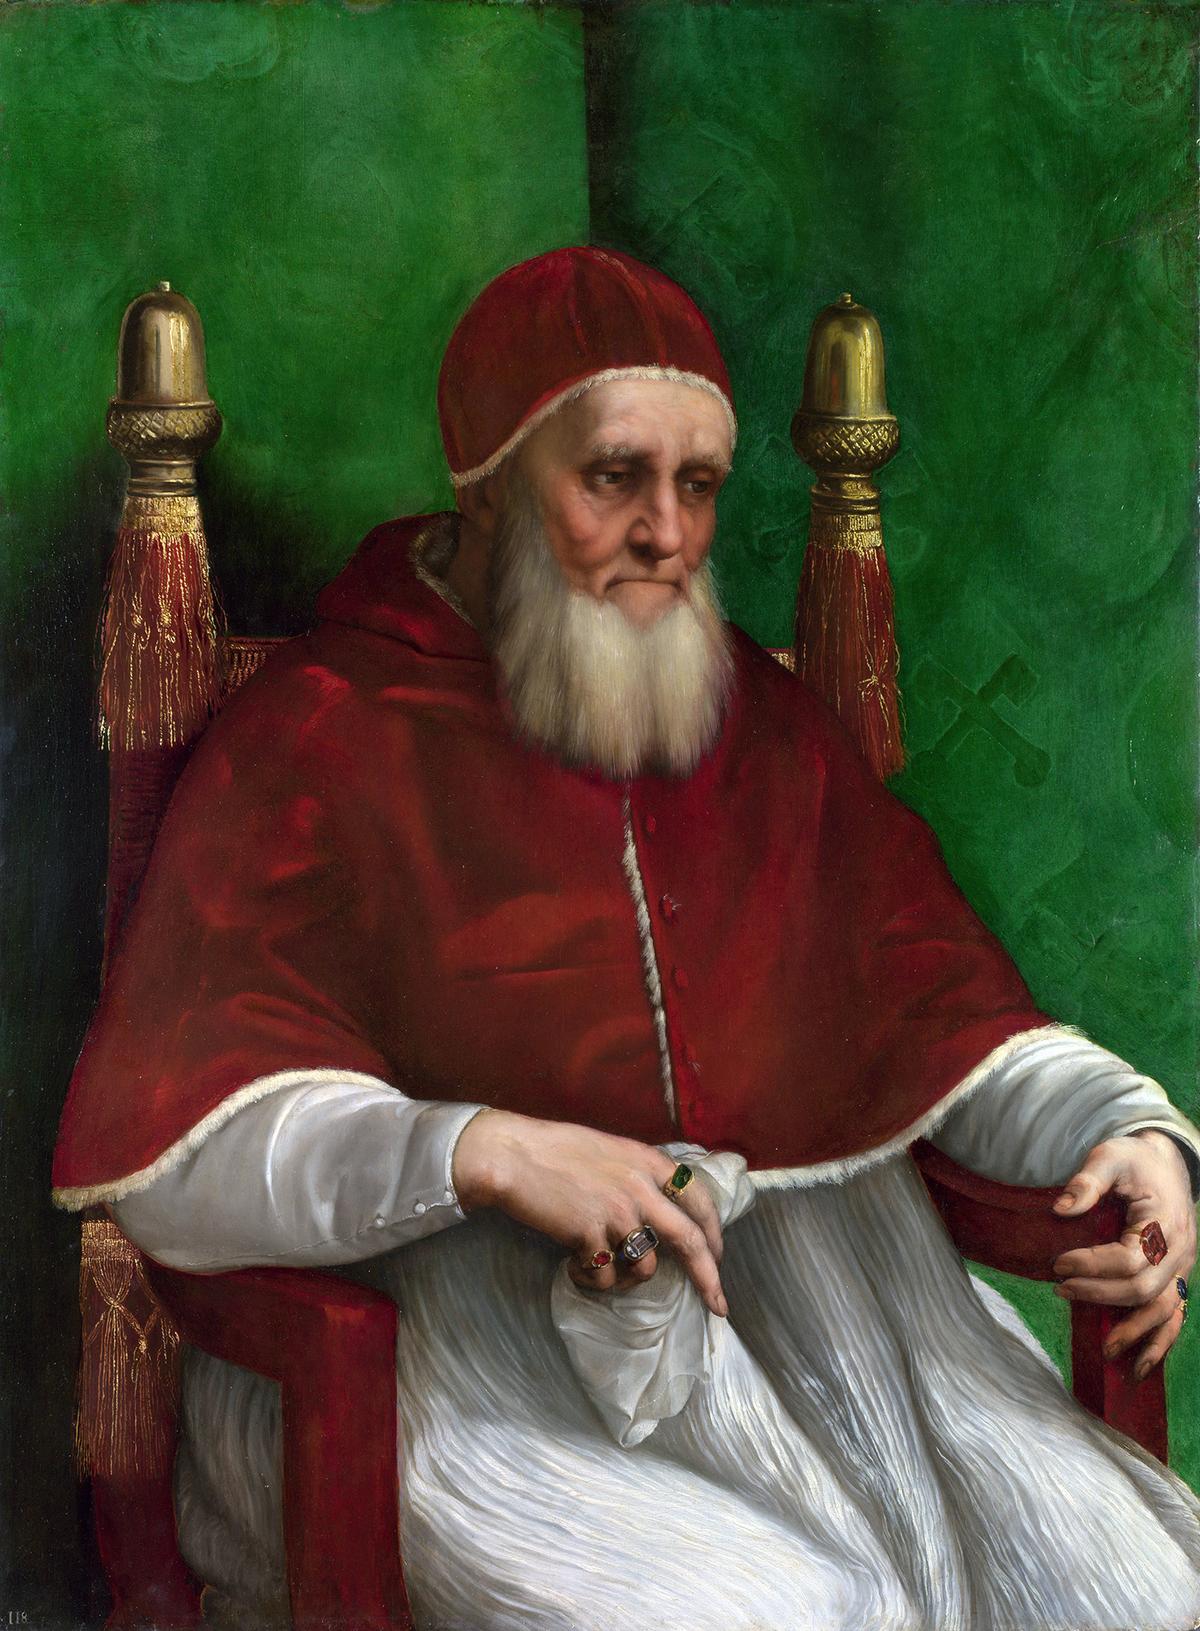 Portrait of Pope Julius II, 1511, by Raphael. Oil on poplar wood; 42.7 inches by 31.8 inches. The National Gallery, London. (Public Domain)